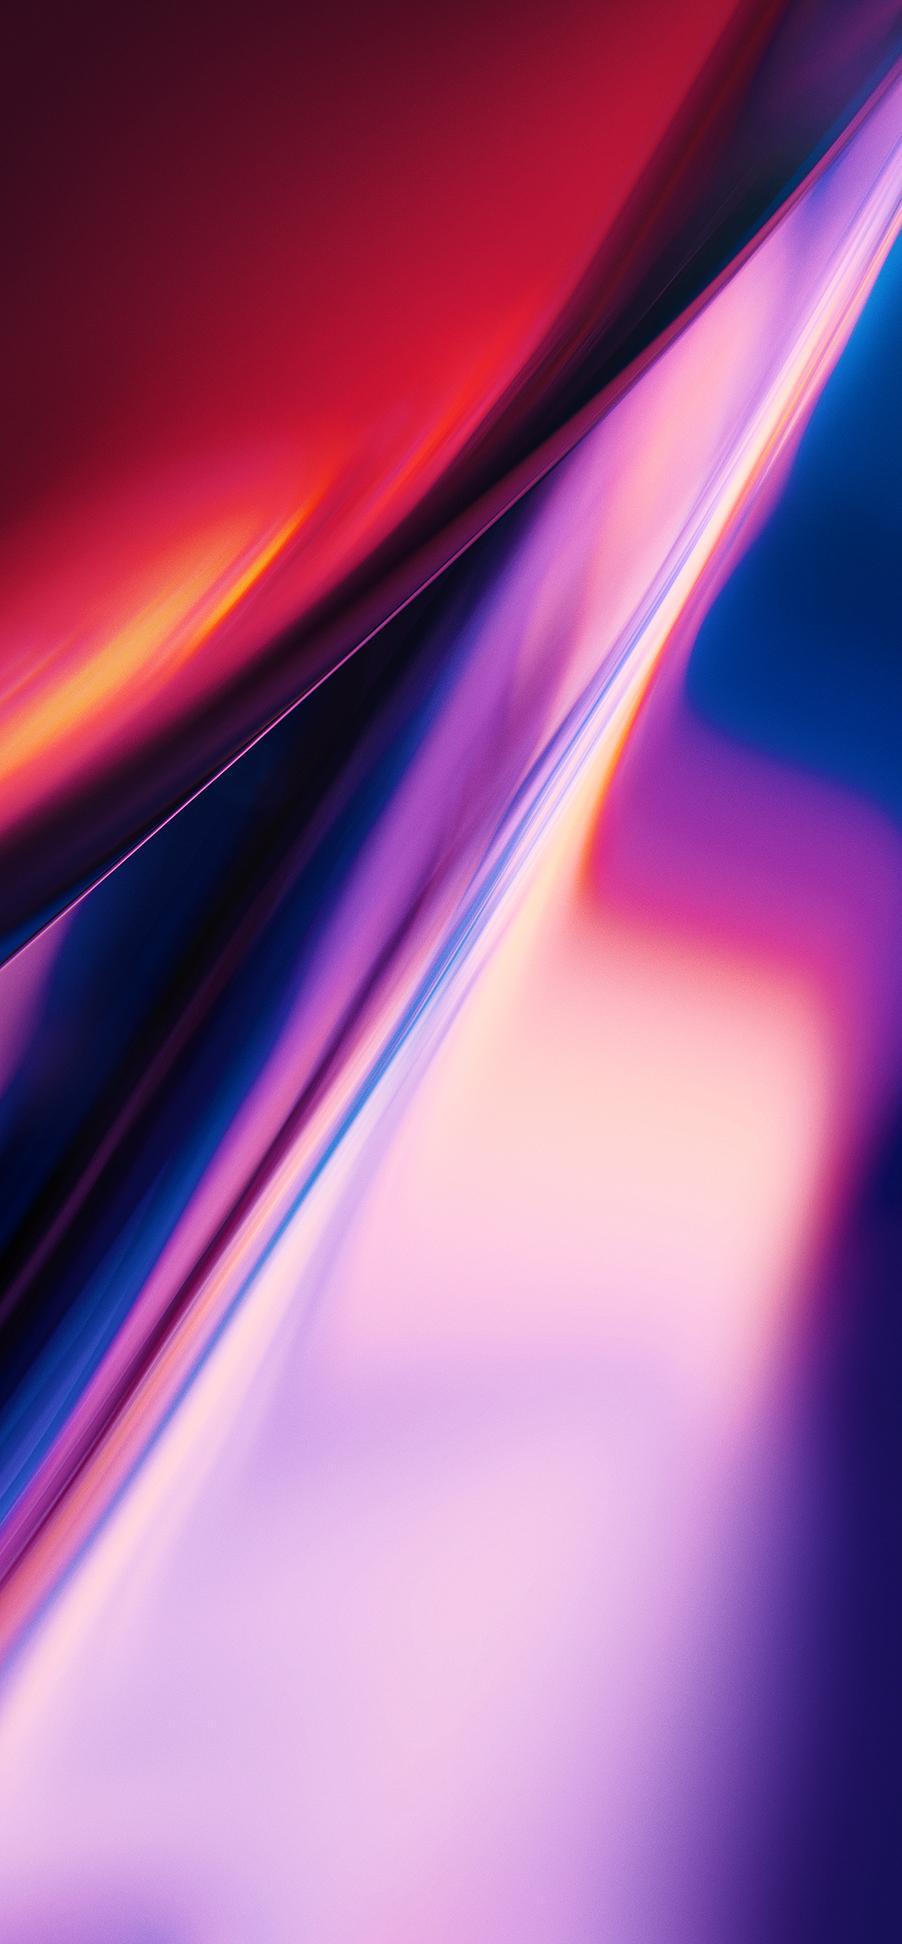 OnePlus Series & Abstruct Wallpapers App Released!